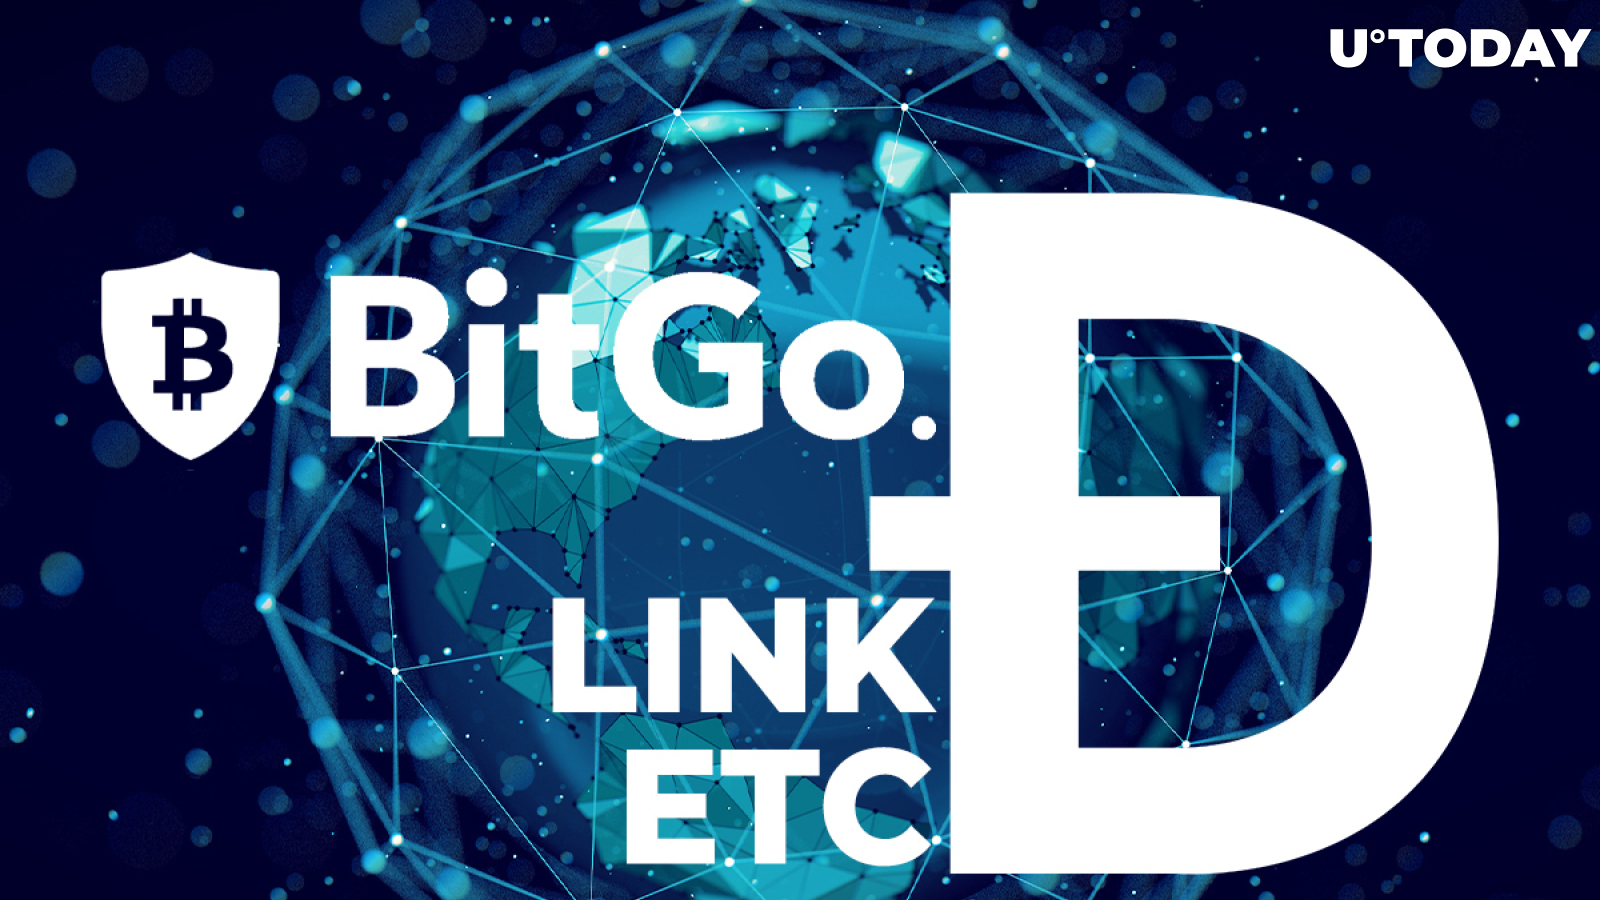 Dogecoin FOMO On Fire, LINK and ETC Records, Galaxy Digital Acquires BitGo: This Day in Crypto